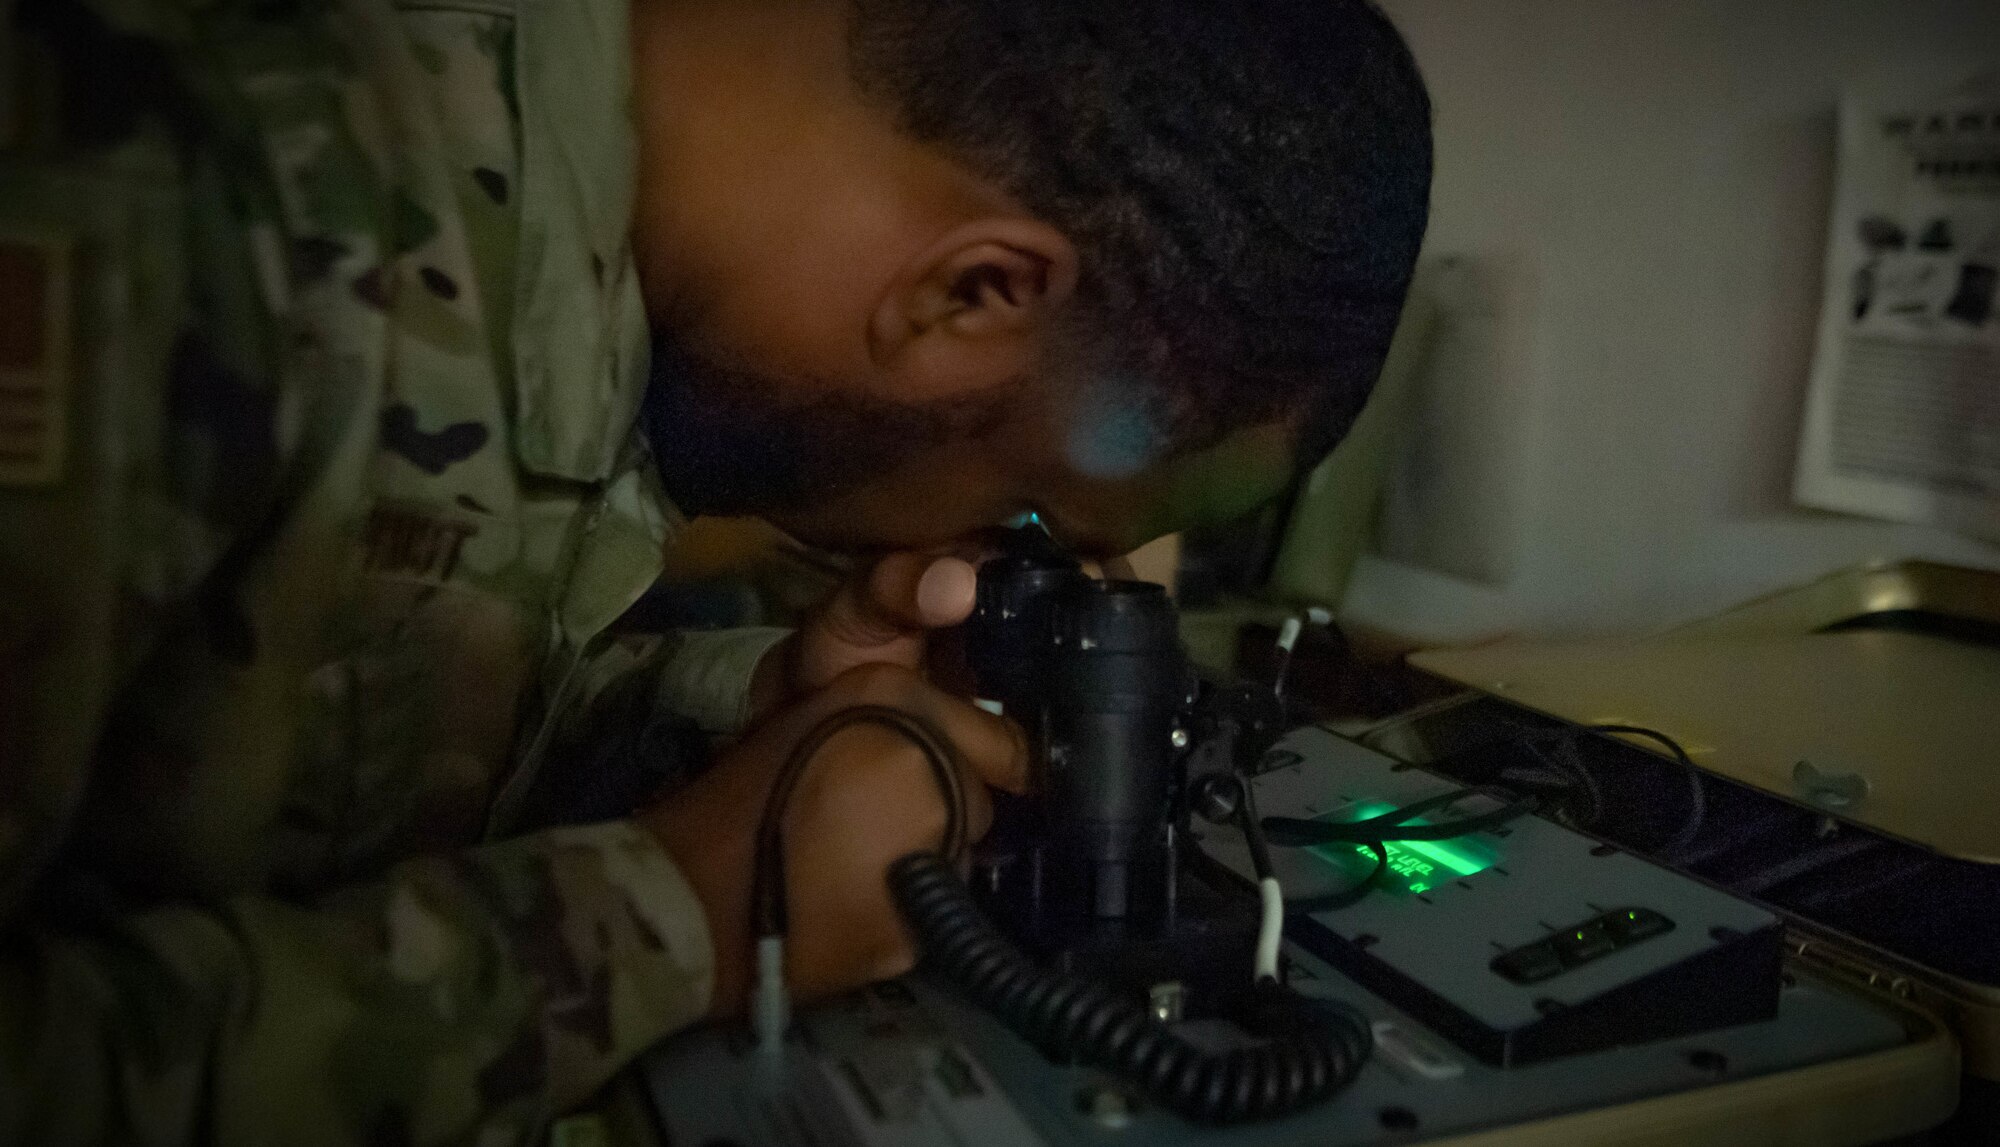 An Airman inspects night vision goggles.